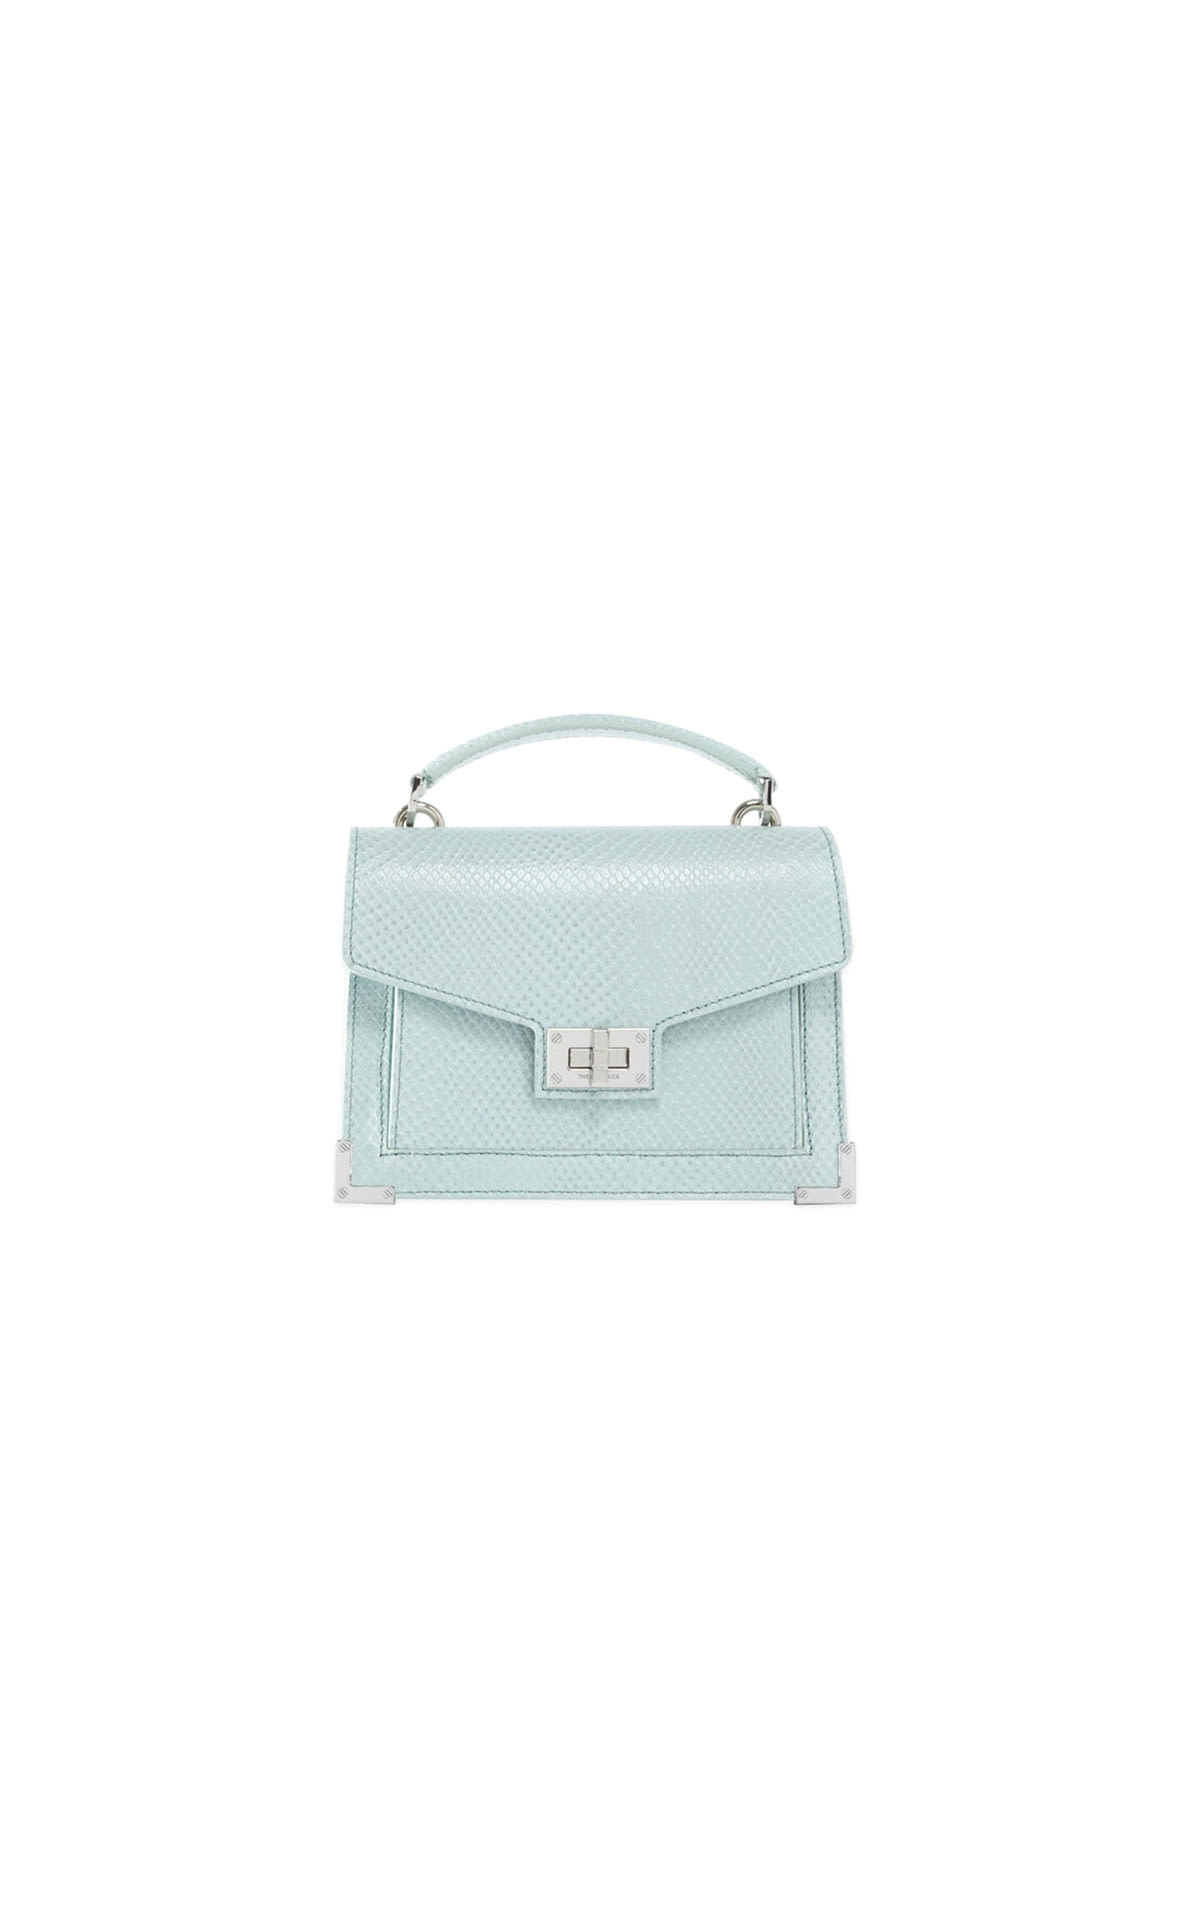 Small blue bag with top handle The Kooples